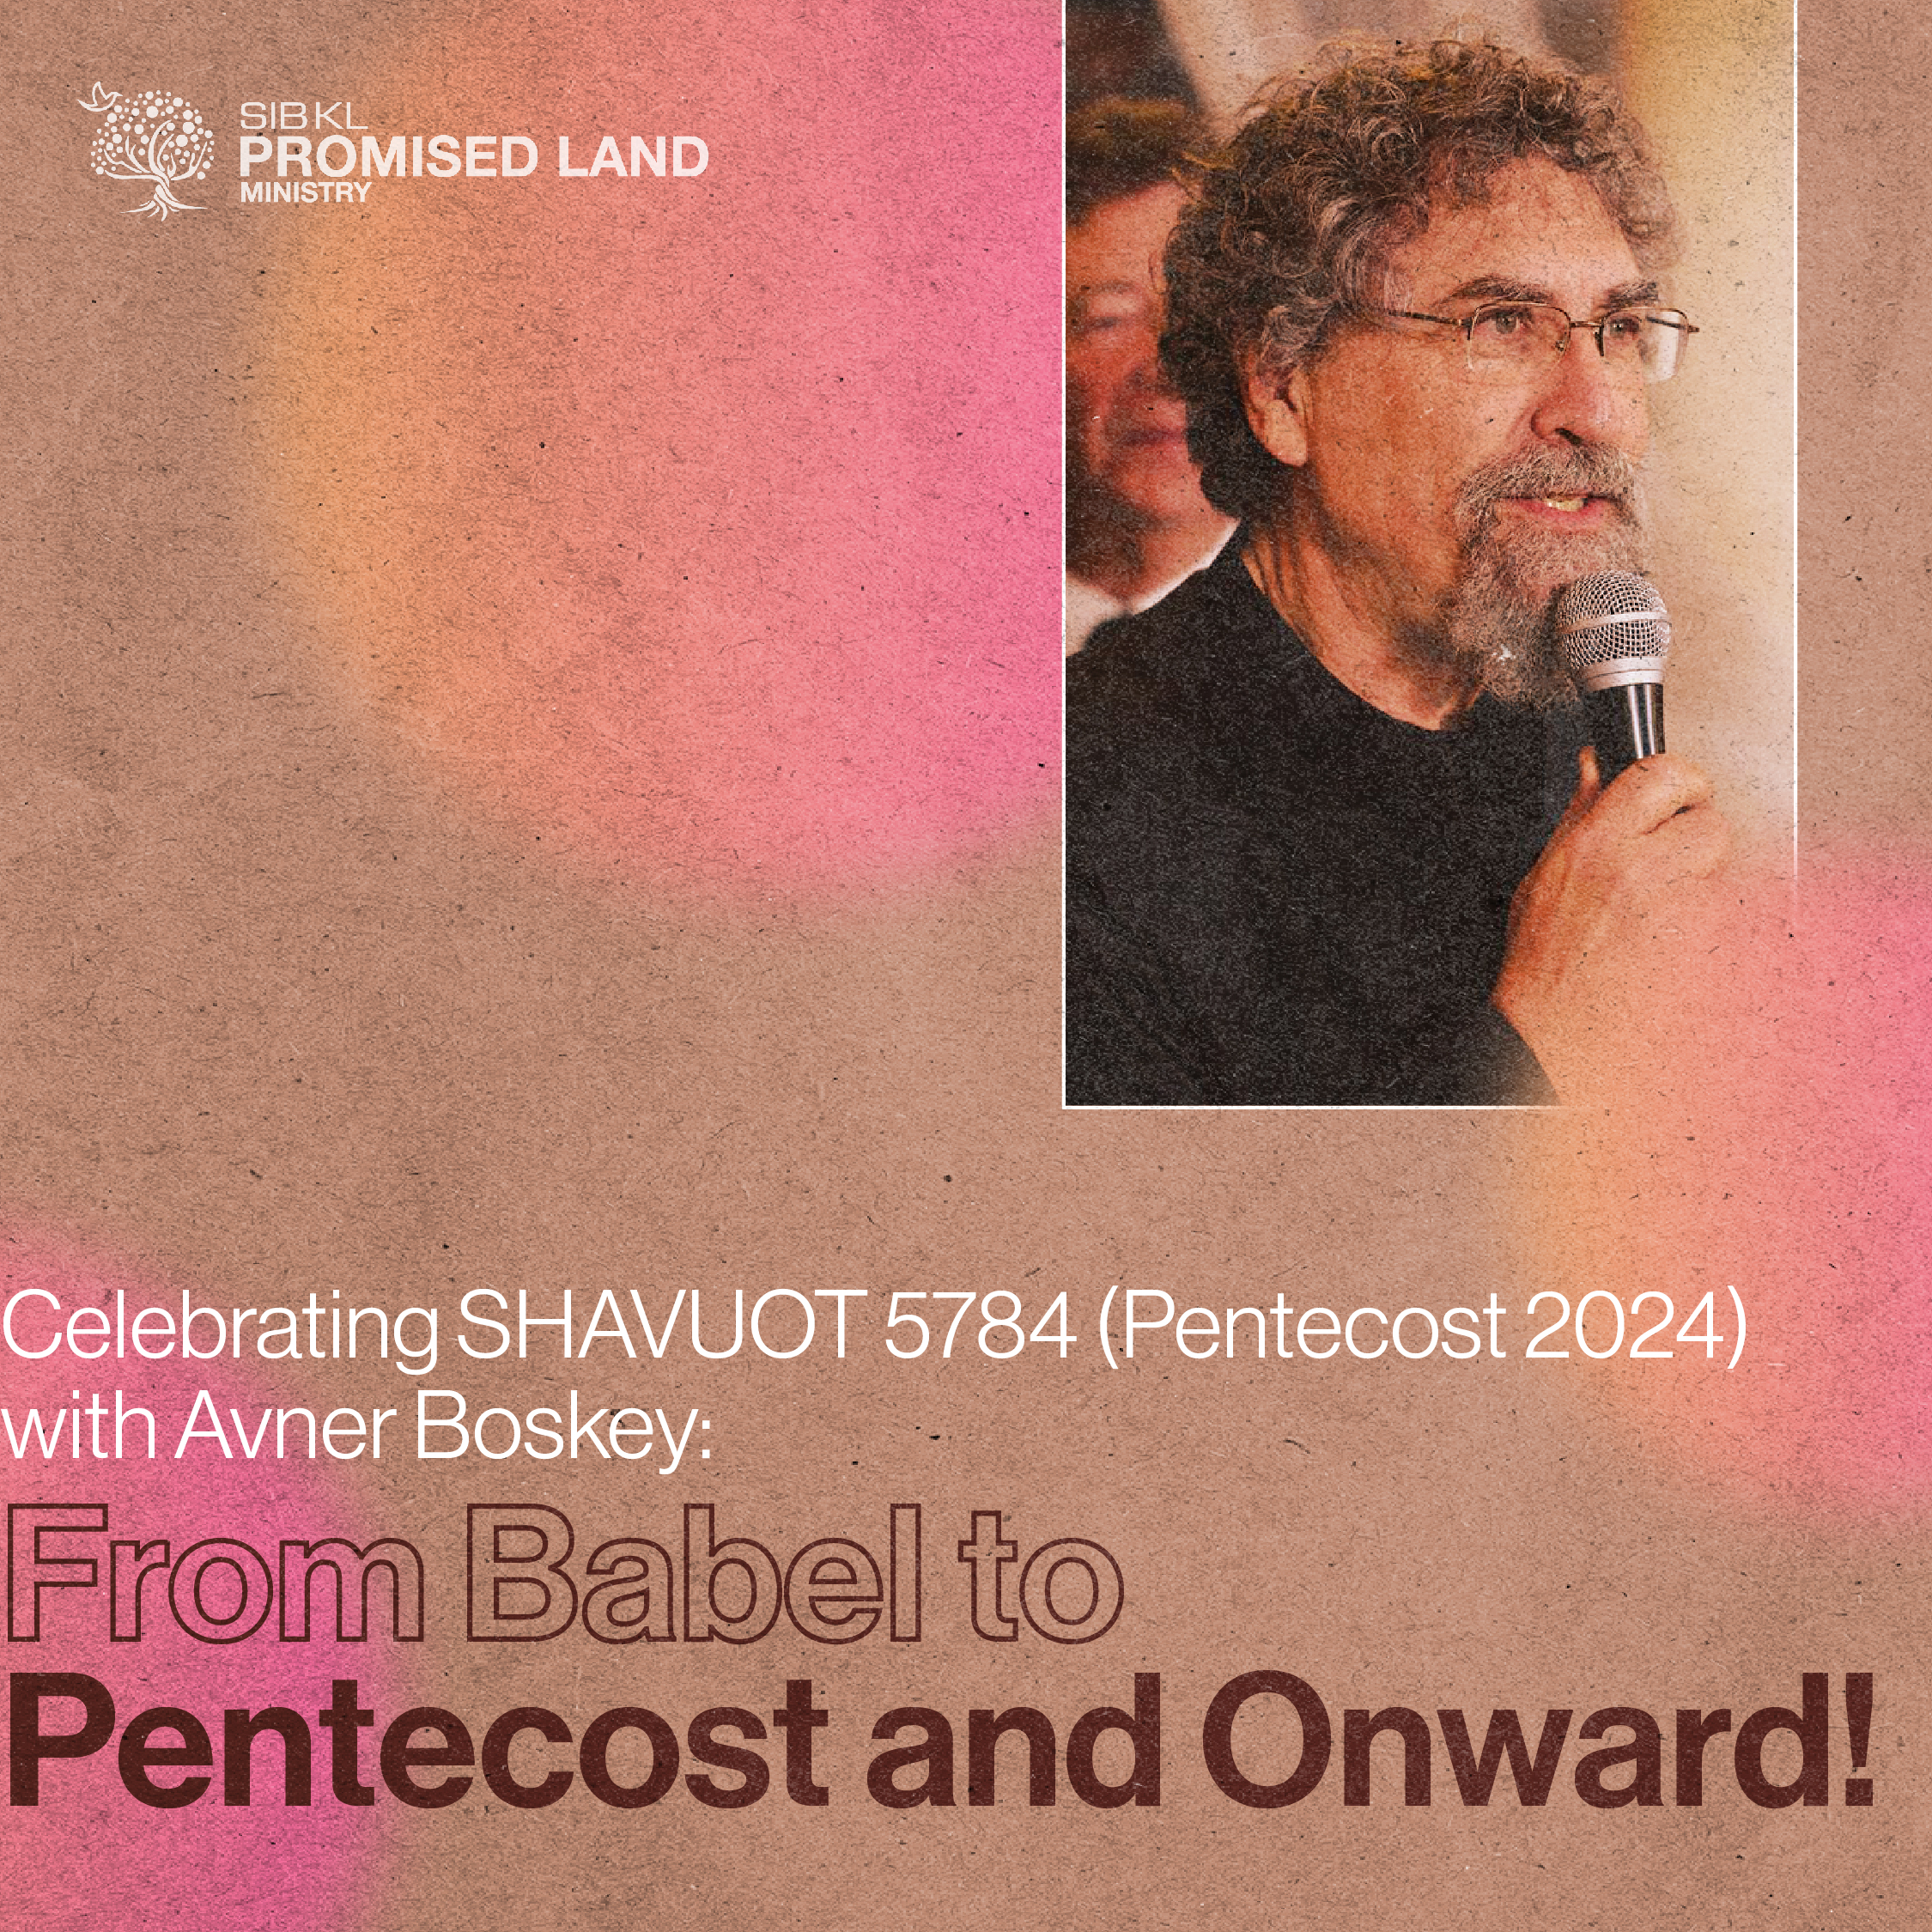 From Babel to Pentecost and Onward!